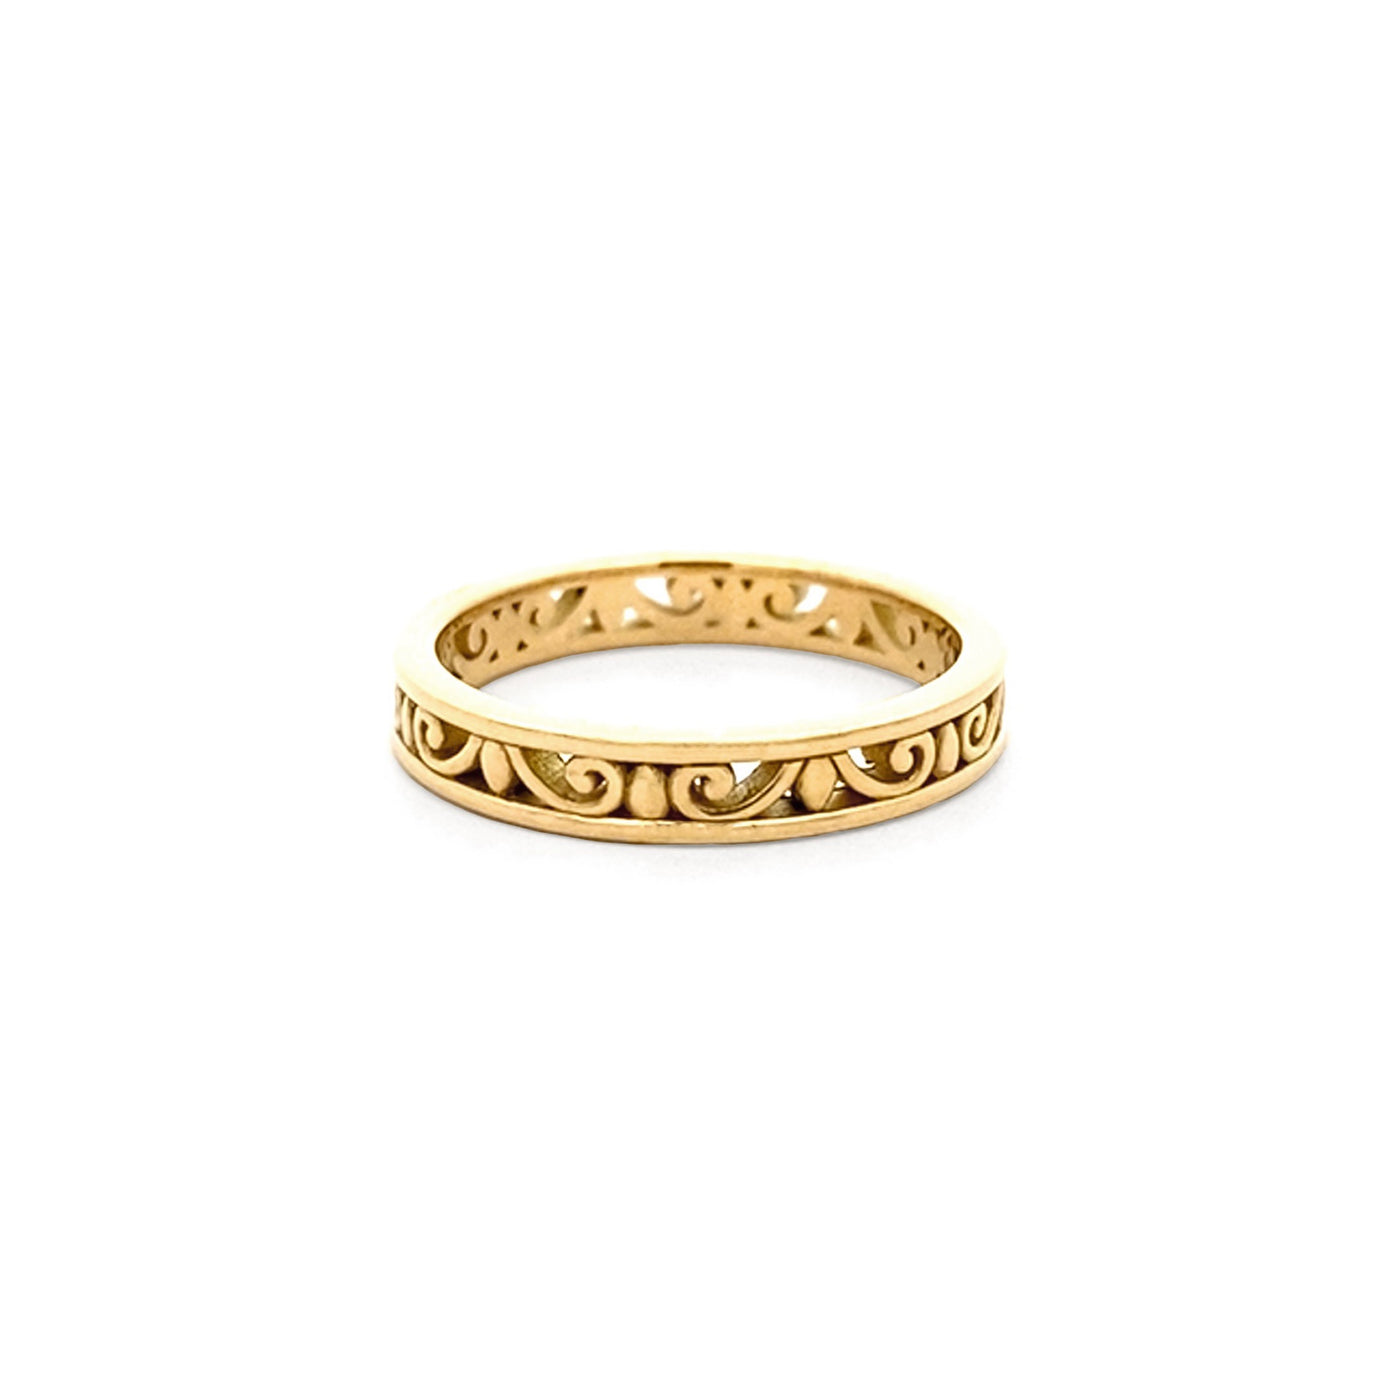 Filigree Patterned Ring in Yellow Gold